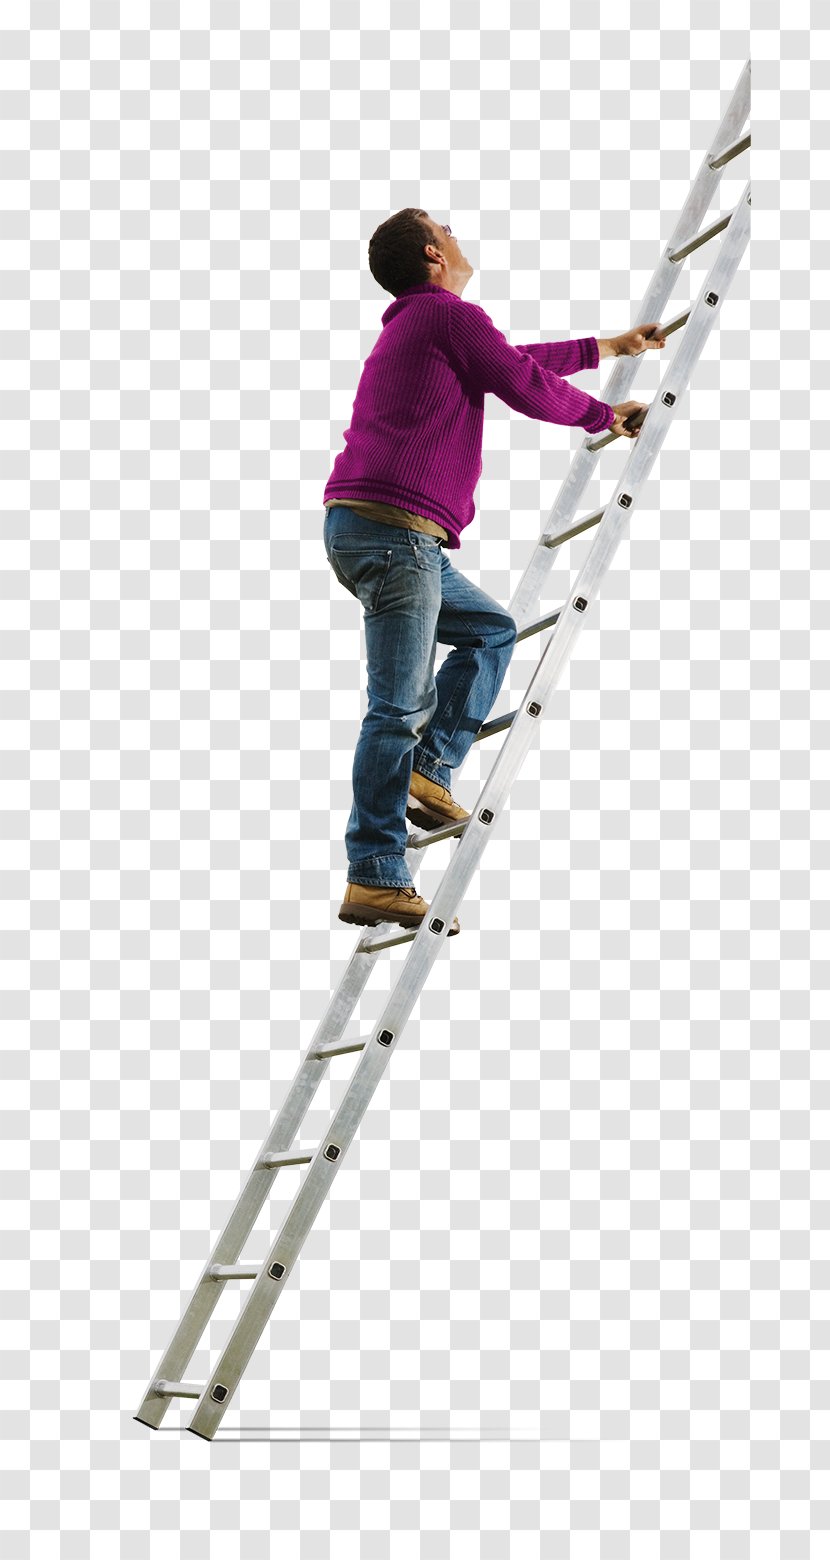 Ladder Štafle Stock Photography Keukentrap Getty Images - Sports Equipment Transparent PNG